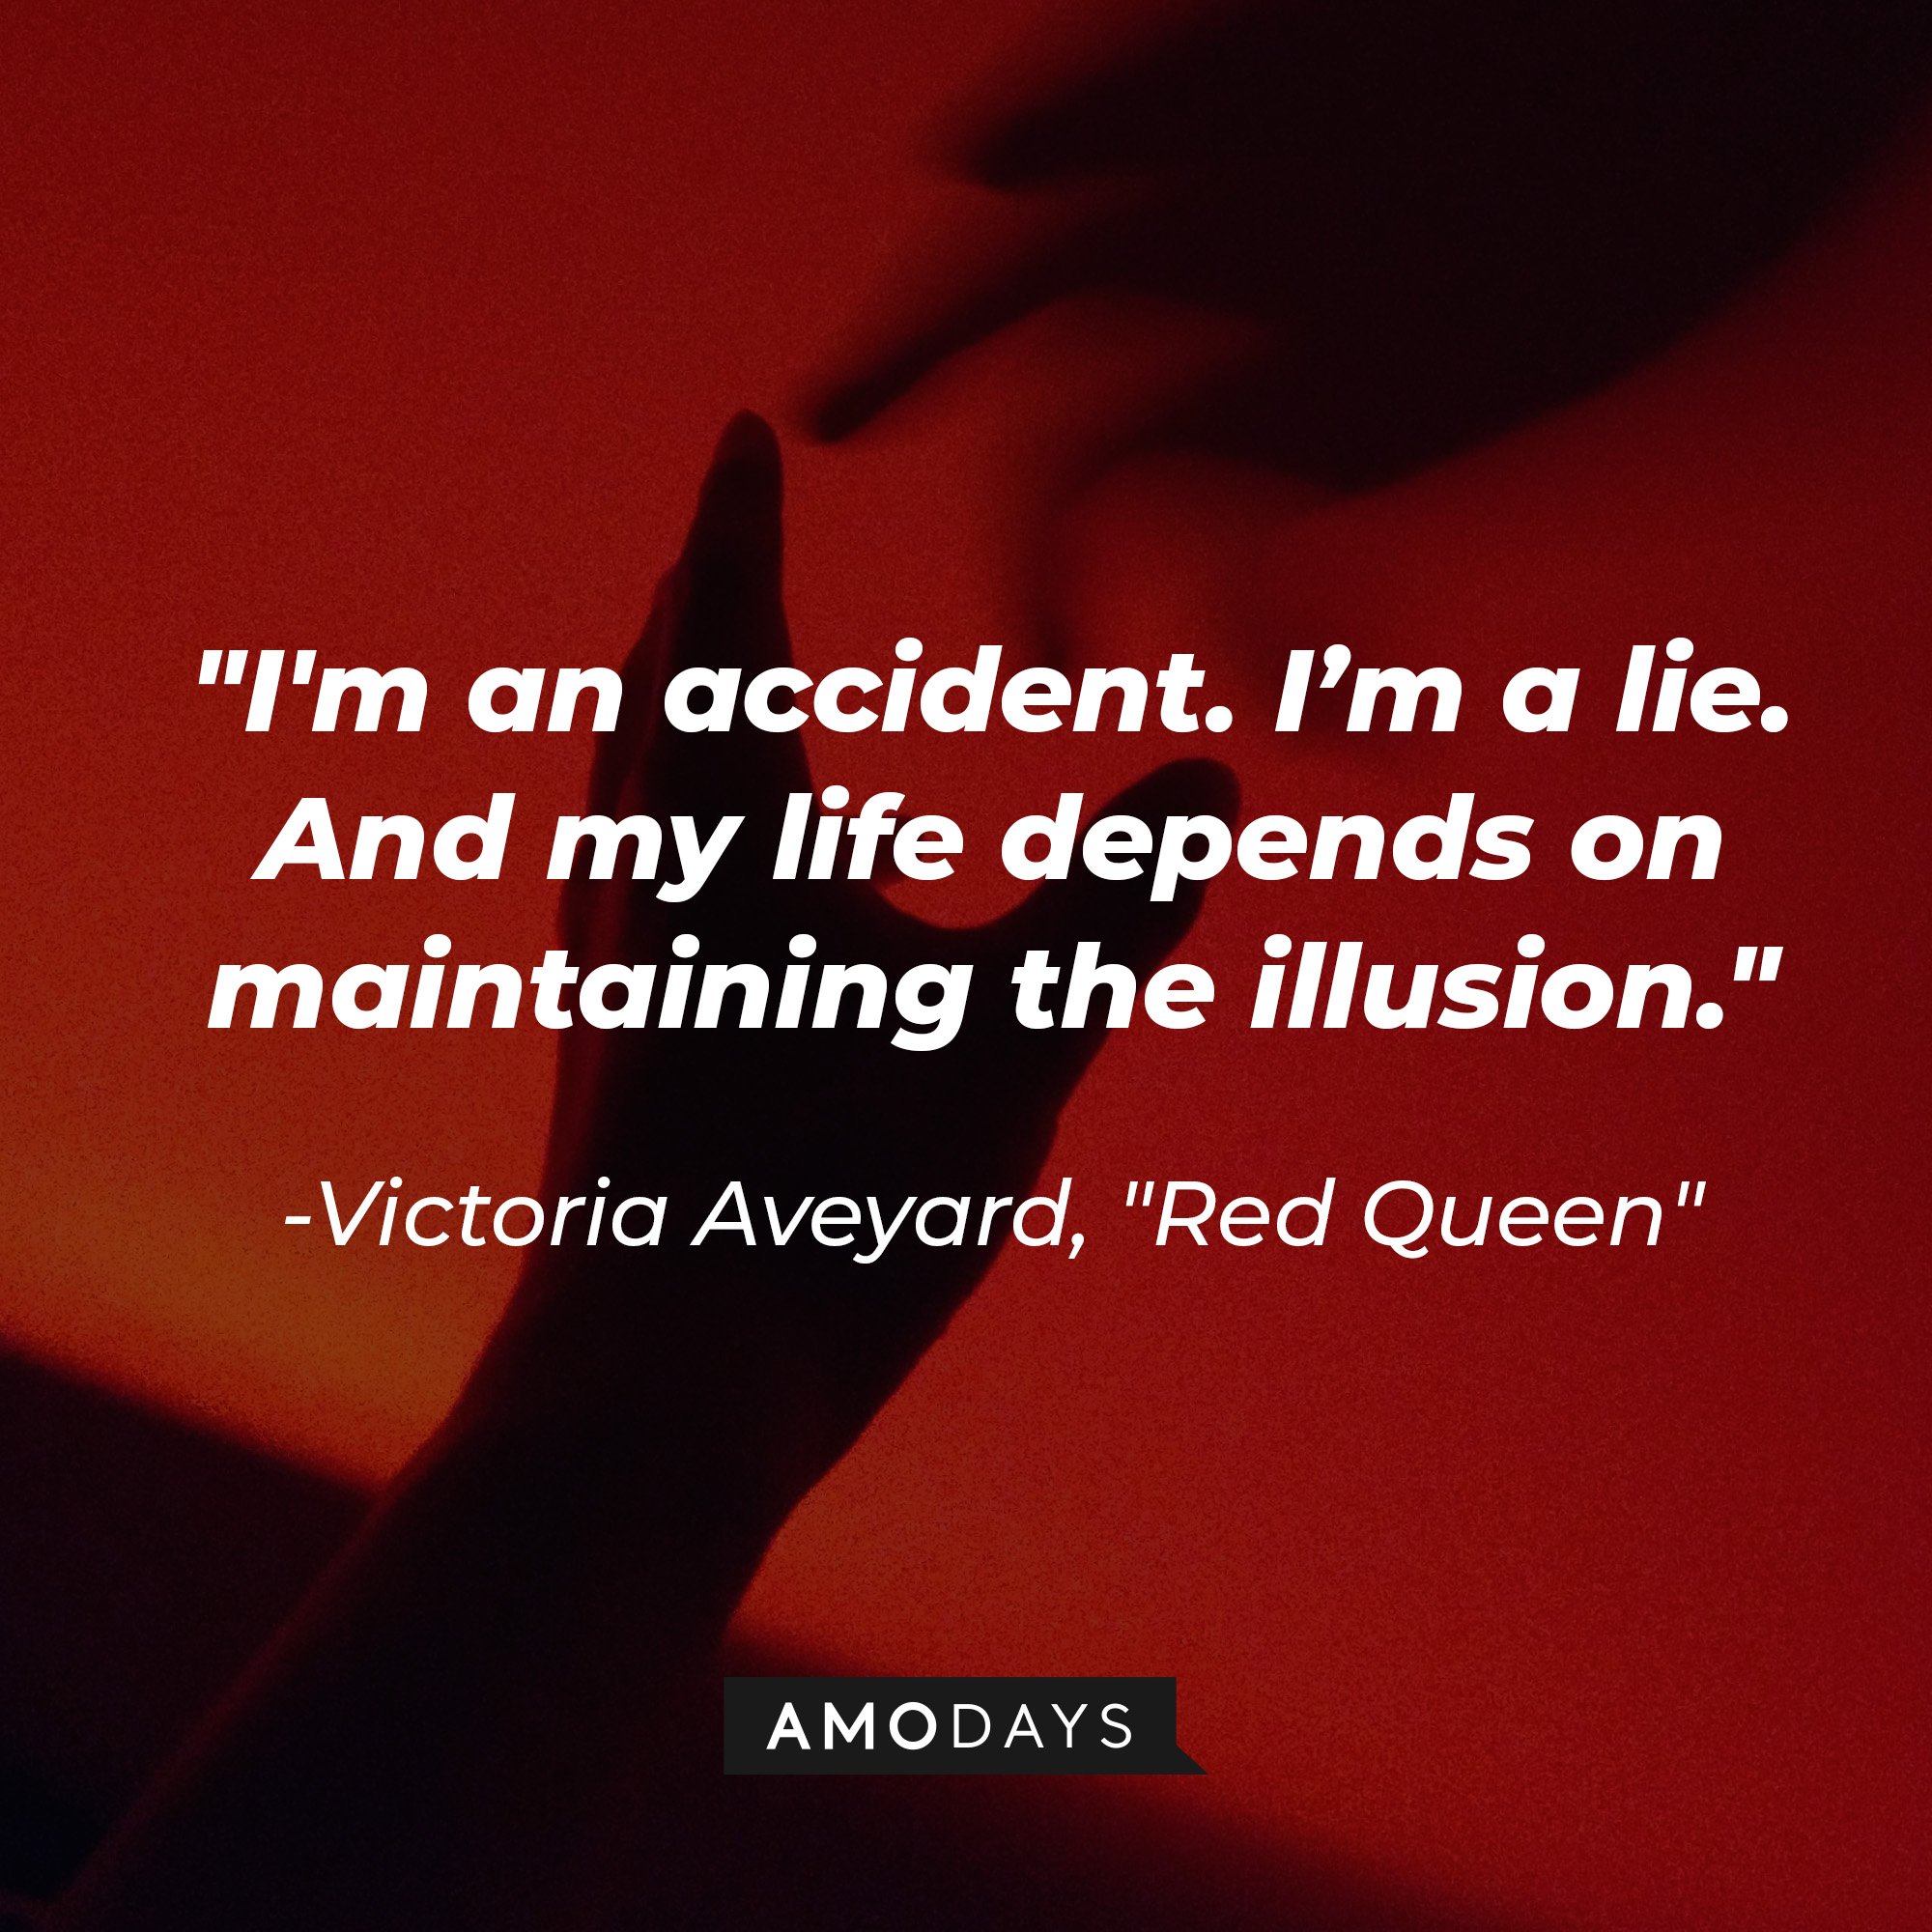 Victoria Aveyard’s quote in “Red Queen”: "I'm an accident. I'm a lie. And my life depends on maintaining the illusion."  | Image: AmoDays